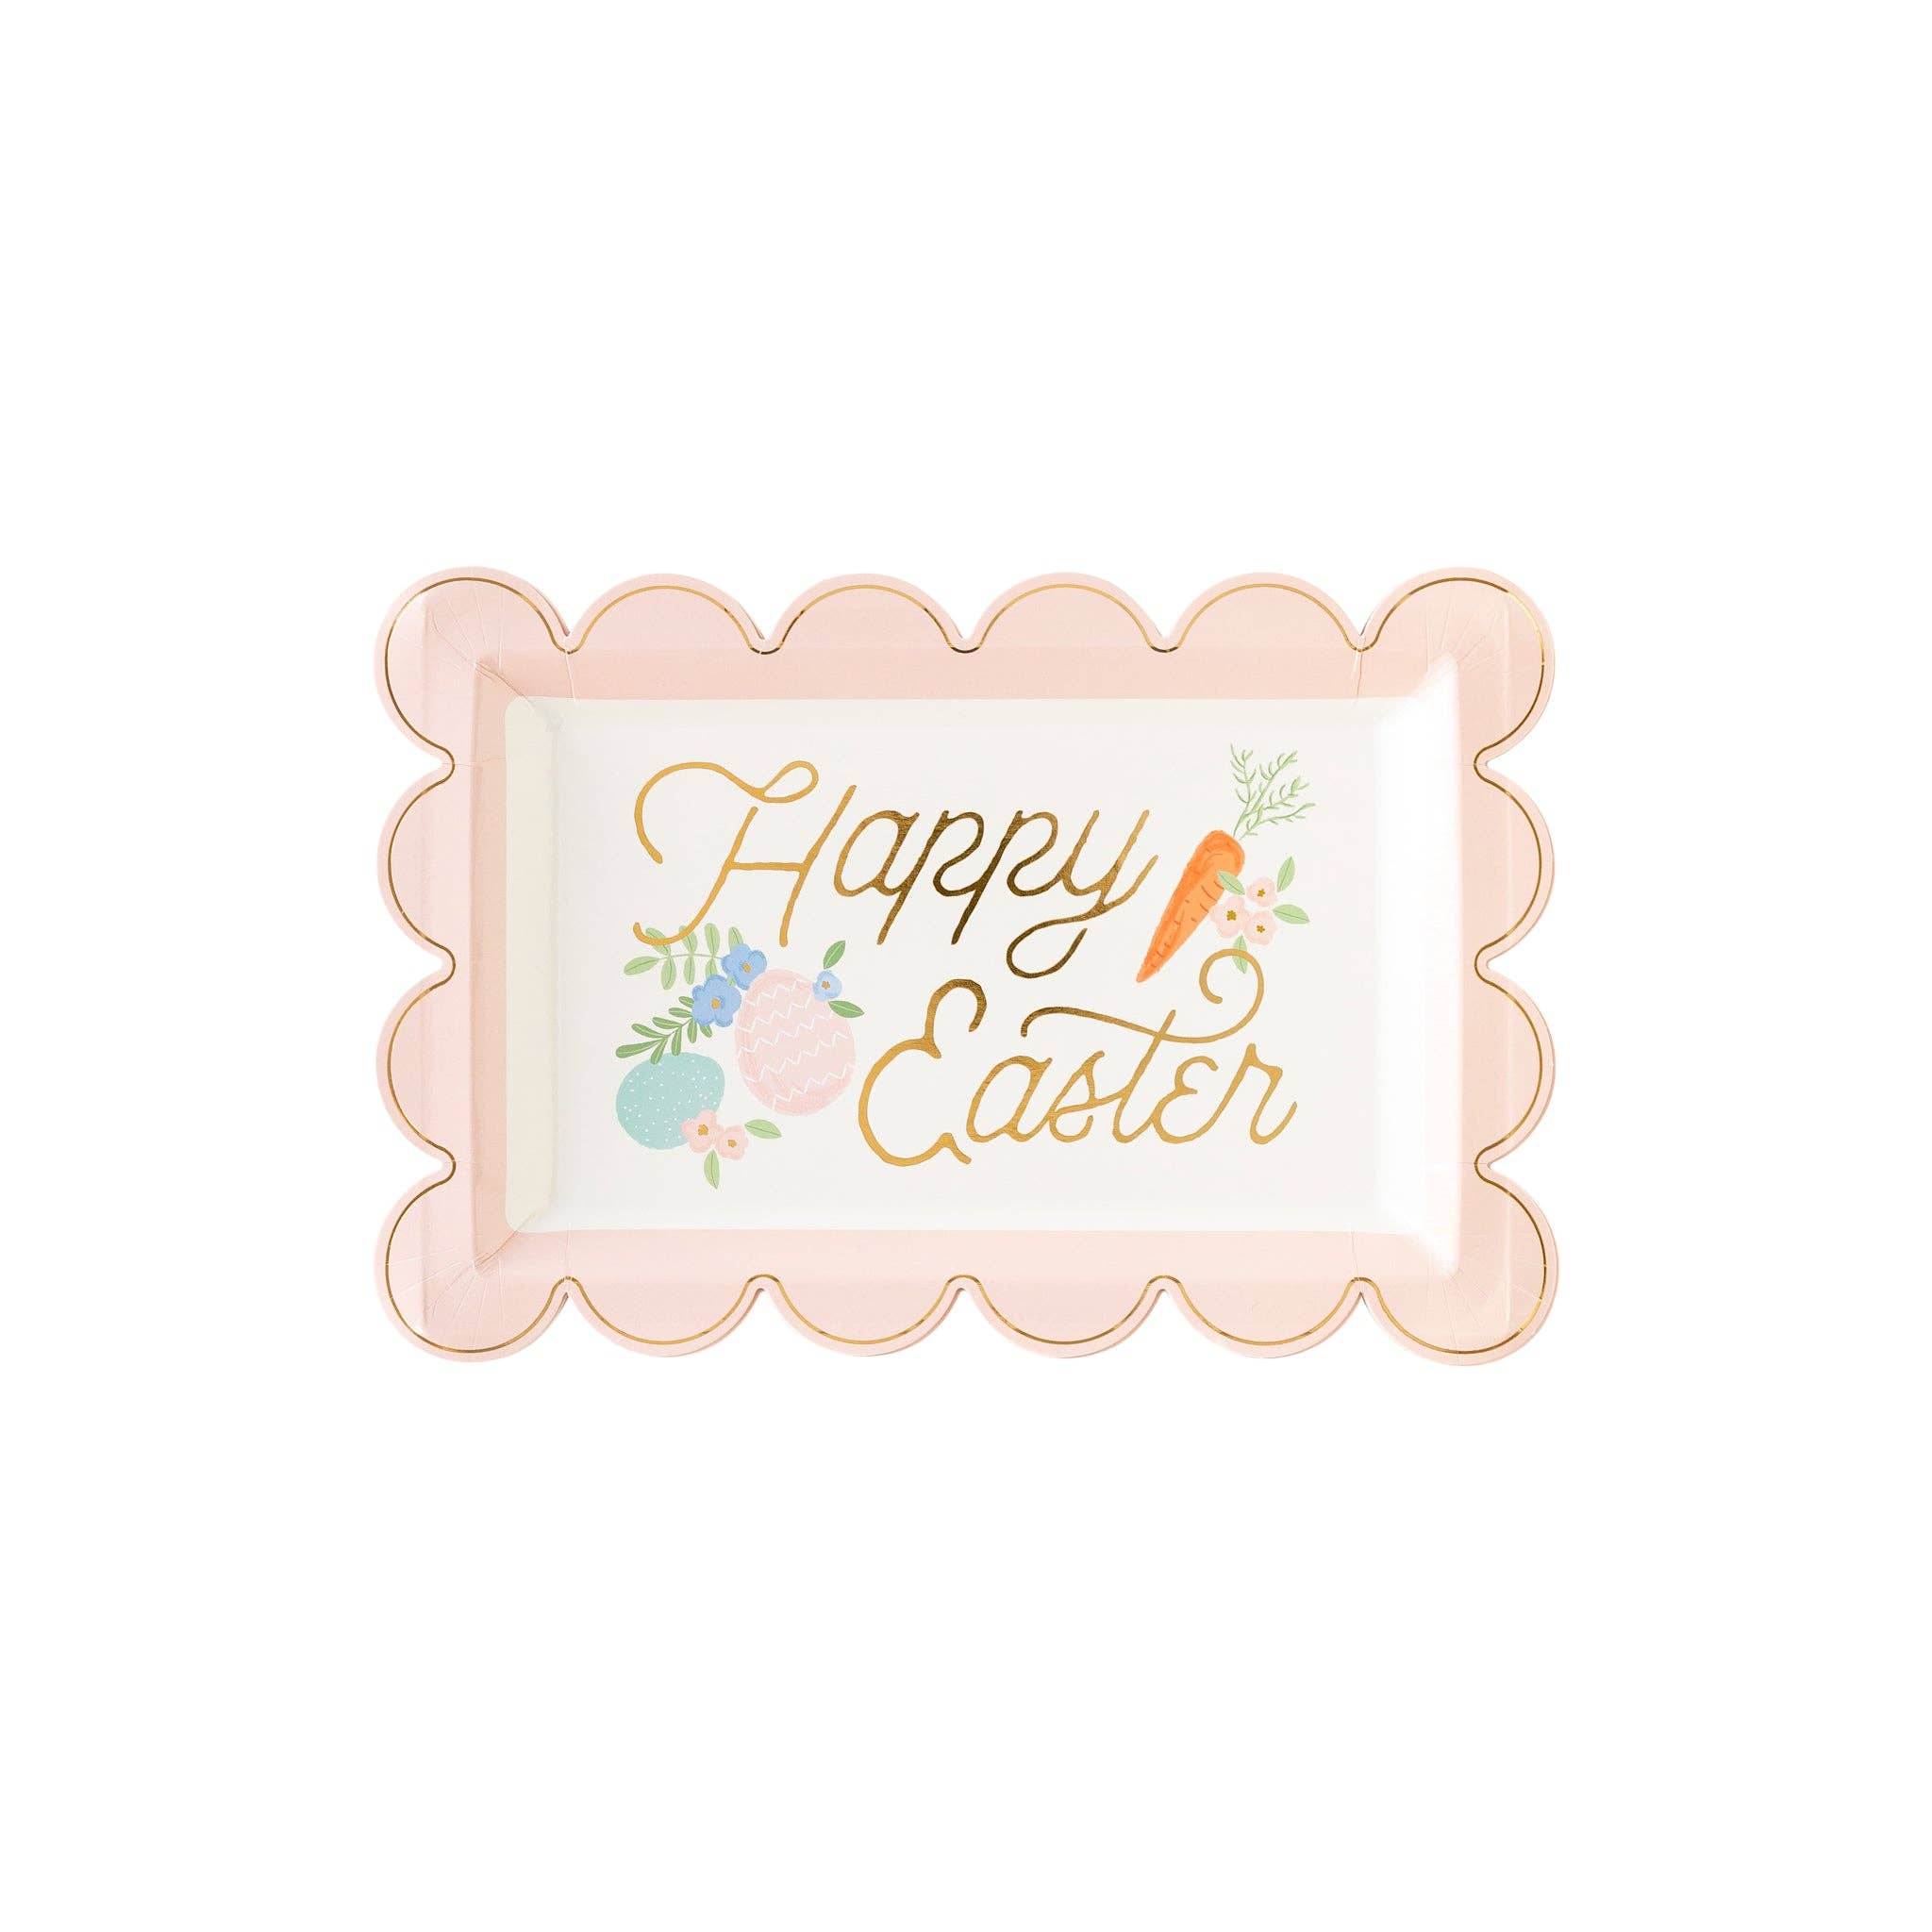 PLTS358P - Easter Scallop Shaped Plate - Oh My Darling Party Co-Faire #Fringe_Backdrop#